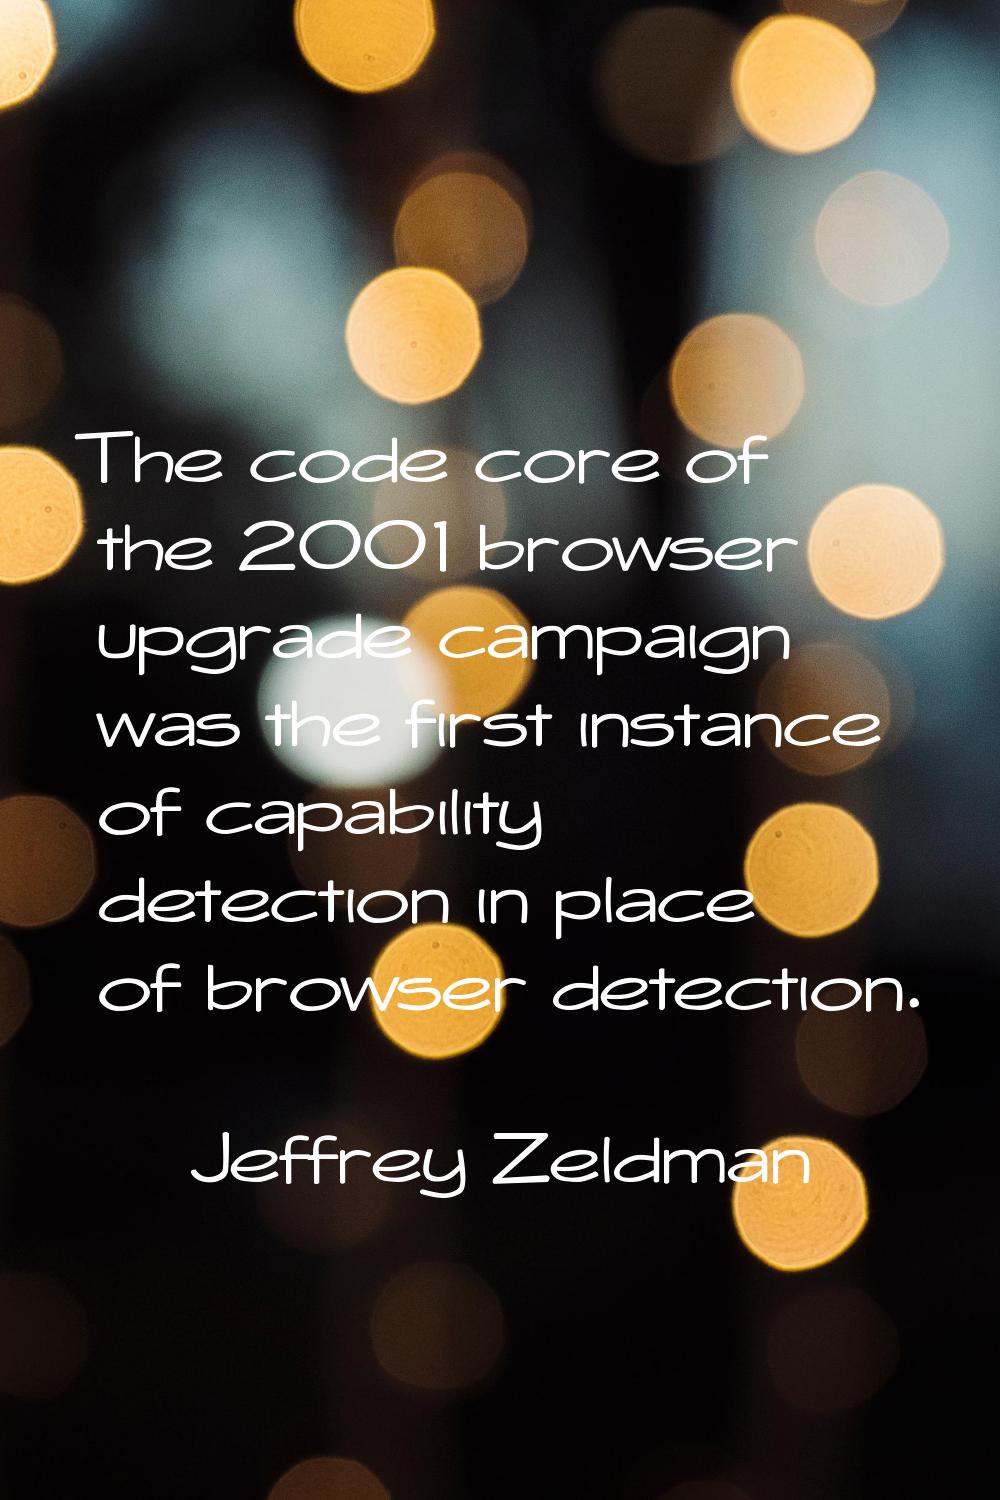 The code core of the 2001 browser upgrade campaign was the first instance of capability detection i